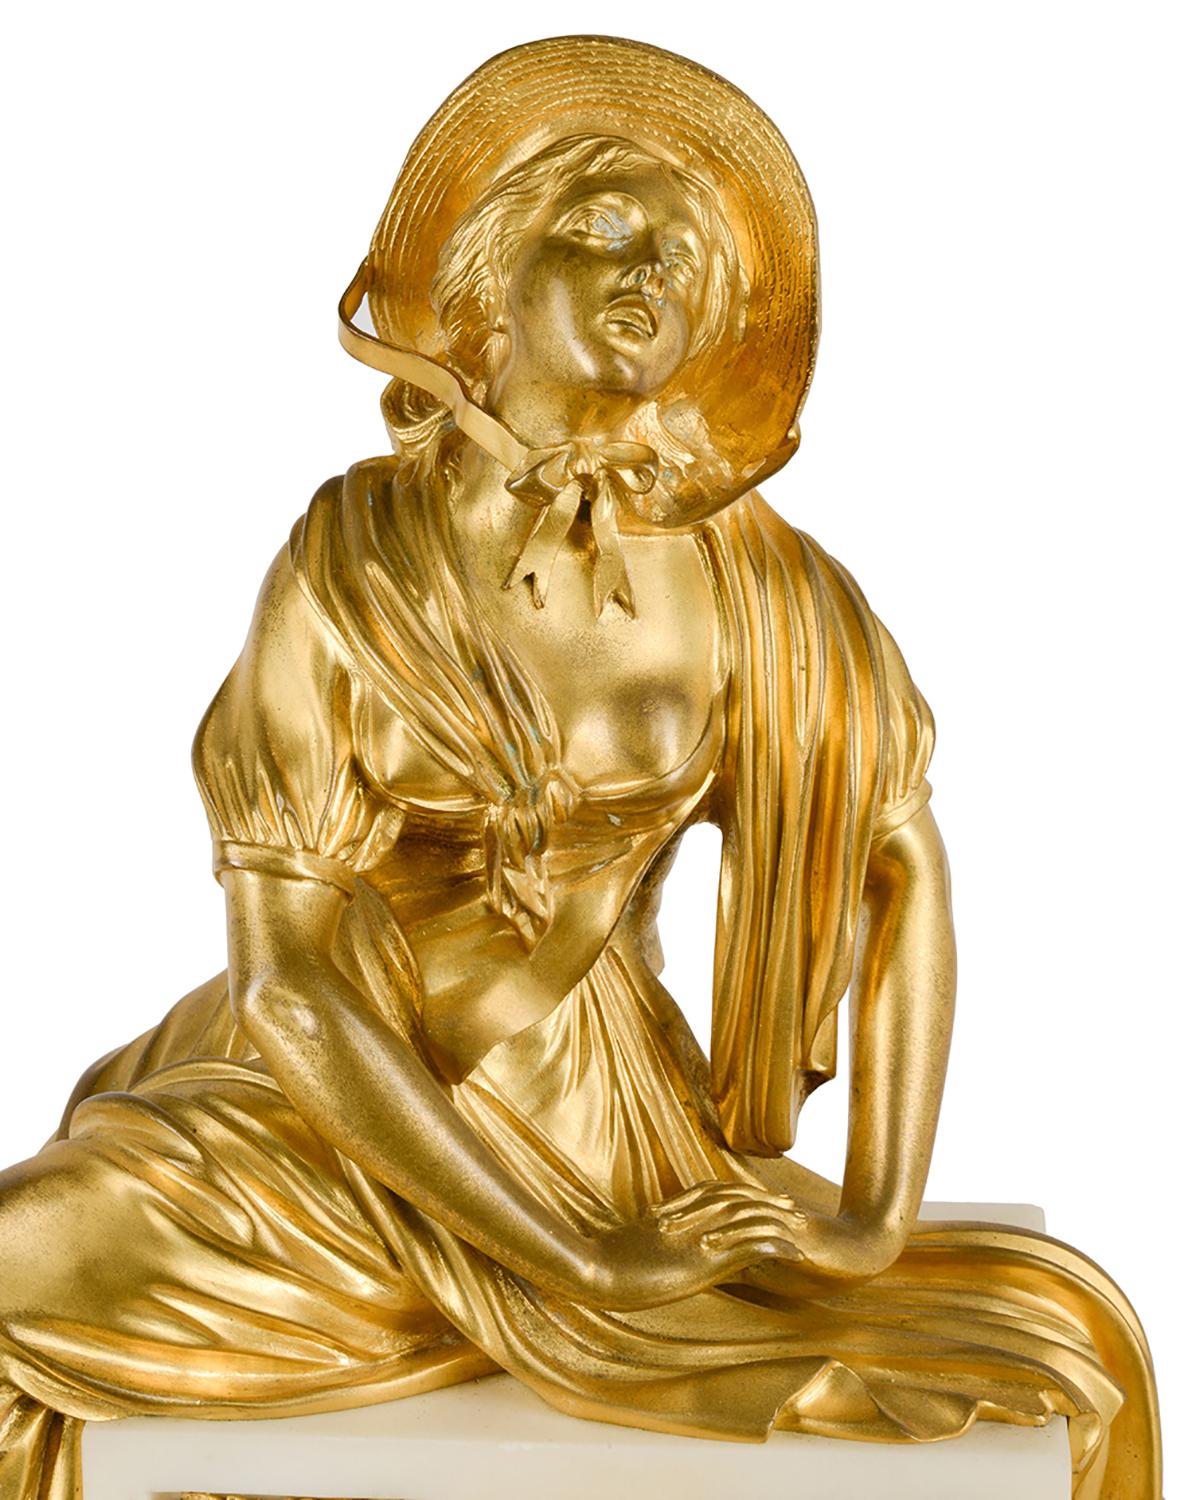 A very good quality 19th century French gilded Ormolu and white marble mantle clock, Having a seated young maiden with a bonnet, above the white enamel clock face, the clock strikes on the hour and half hour. An Ormolu cherub knelling by a broken